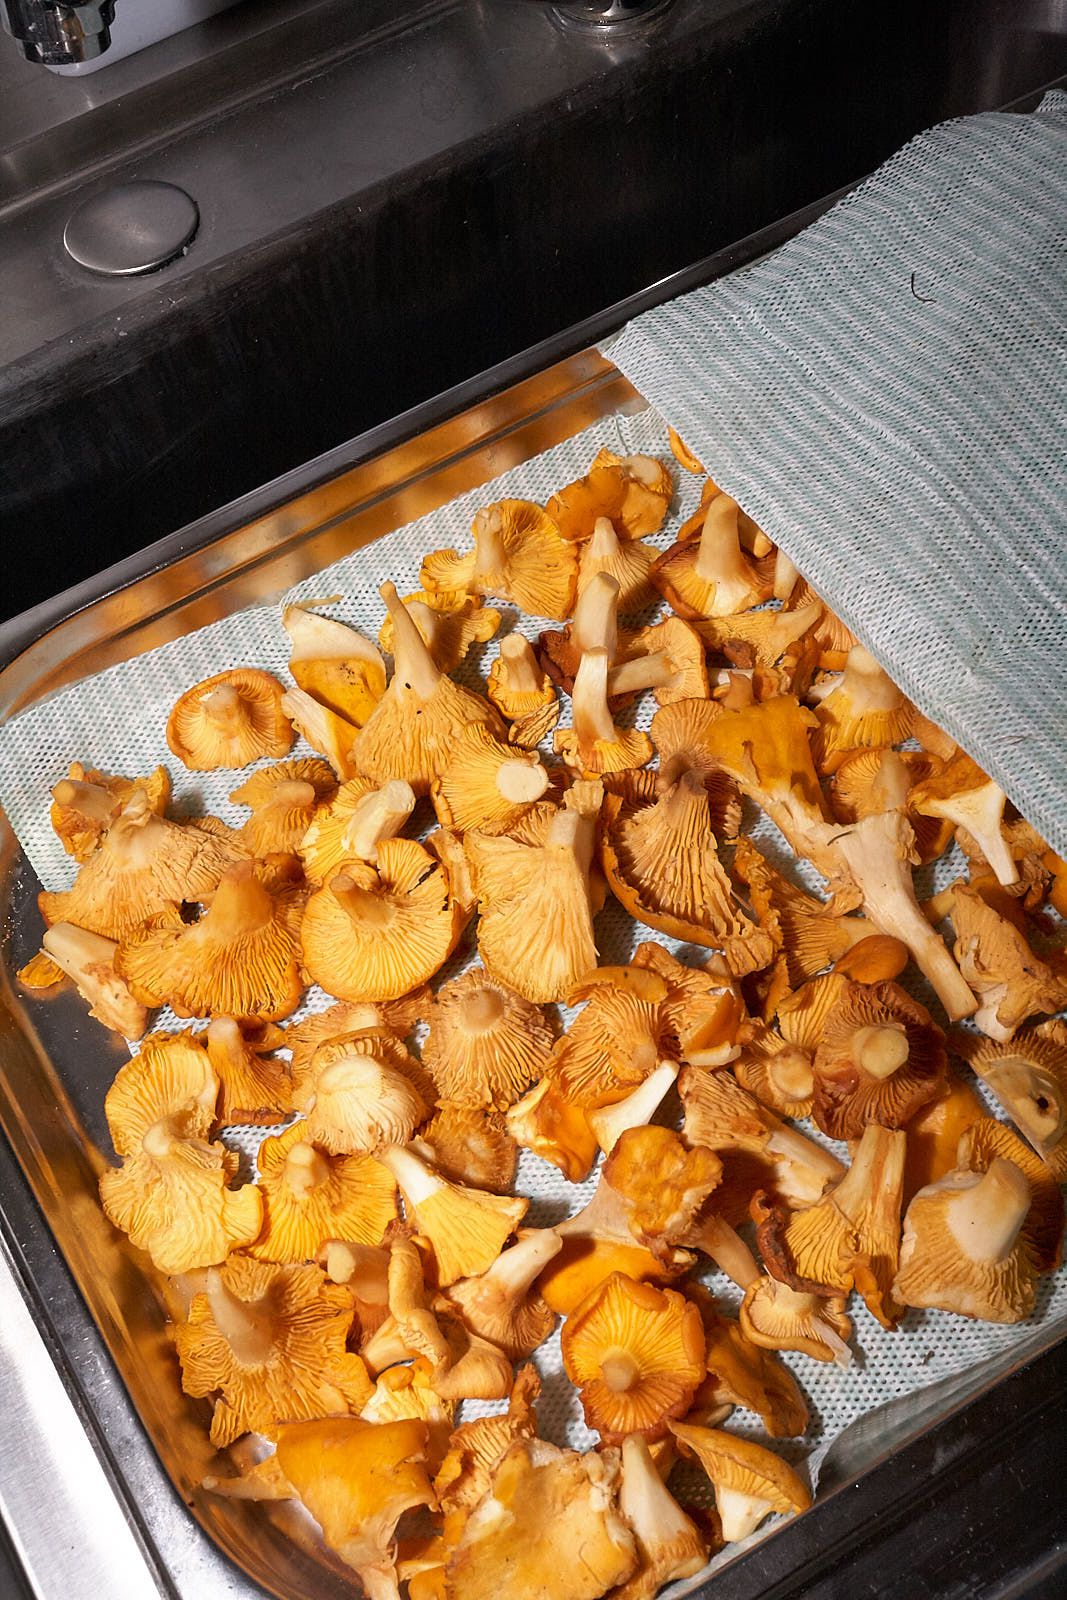 A tray of girolle mushrooms on a cloth.